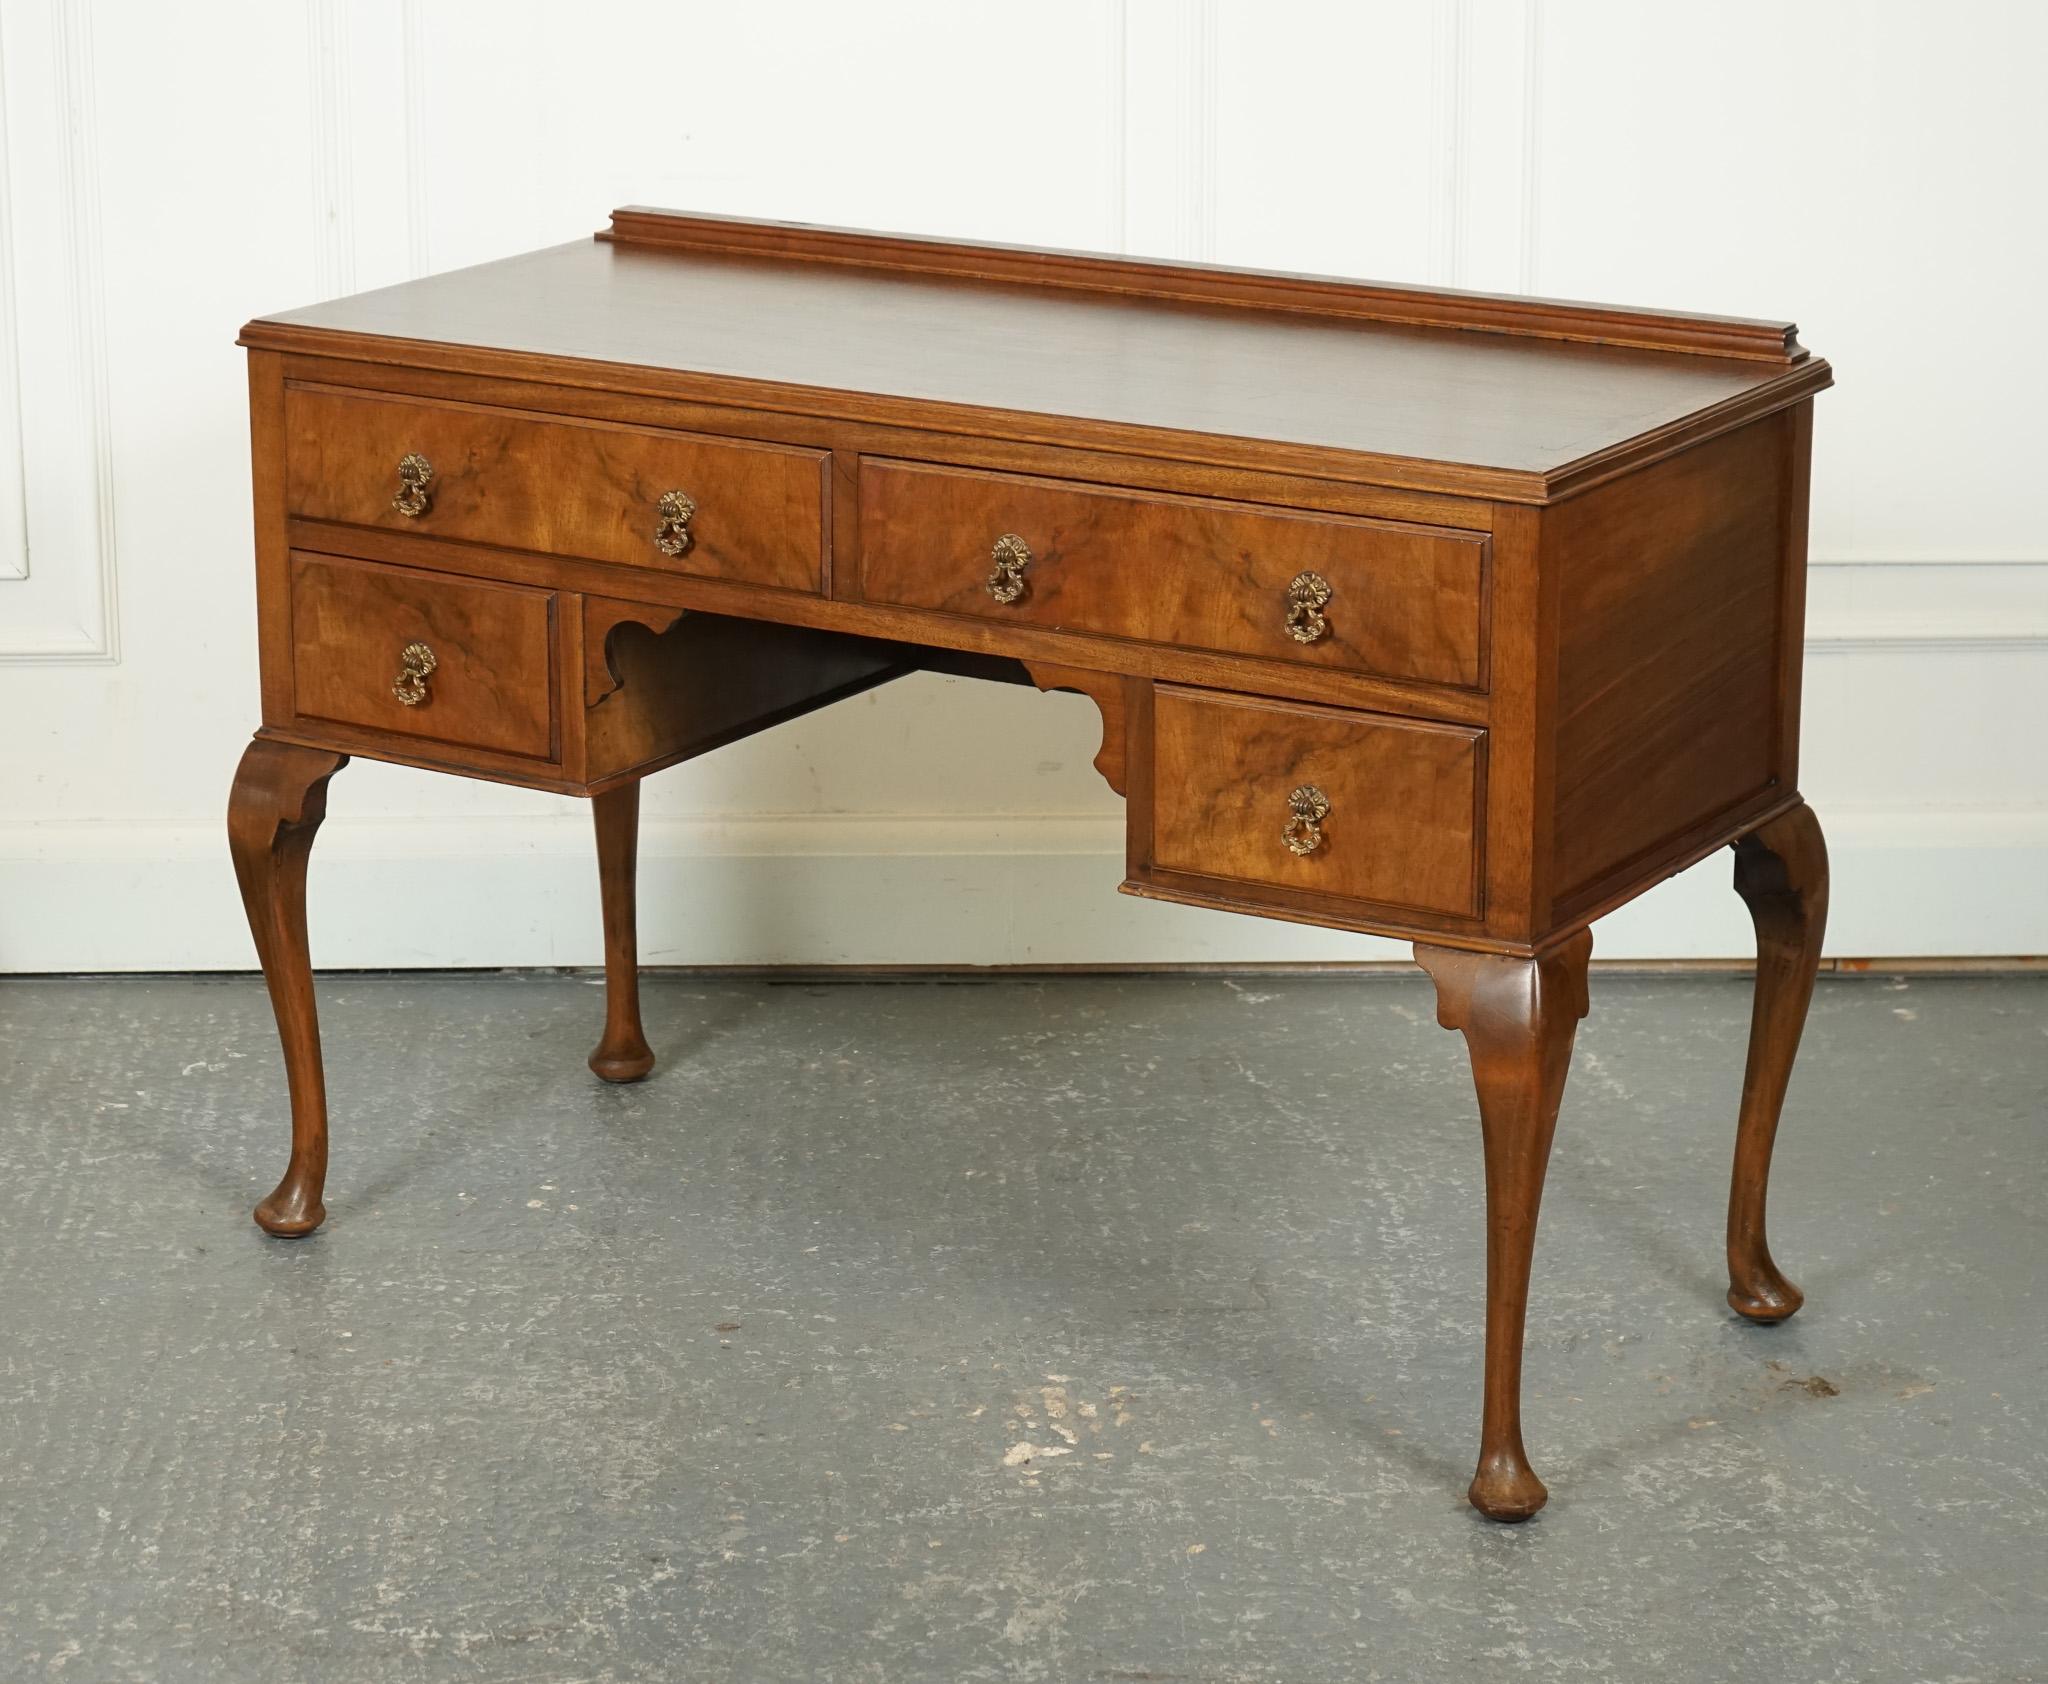 

We are delighted to offer for sale this Vintage Burr Walnut Dressing Table.

This vintage Burr Walnut dressing table desk, raised on Queen Anne legs, is a stunning piece that exudes elegance and sophistication. The use of Burr Walnut, known for